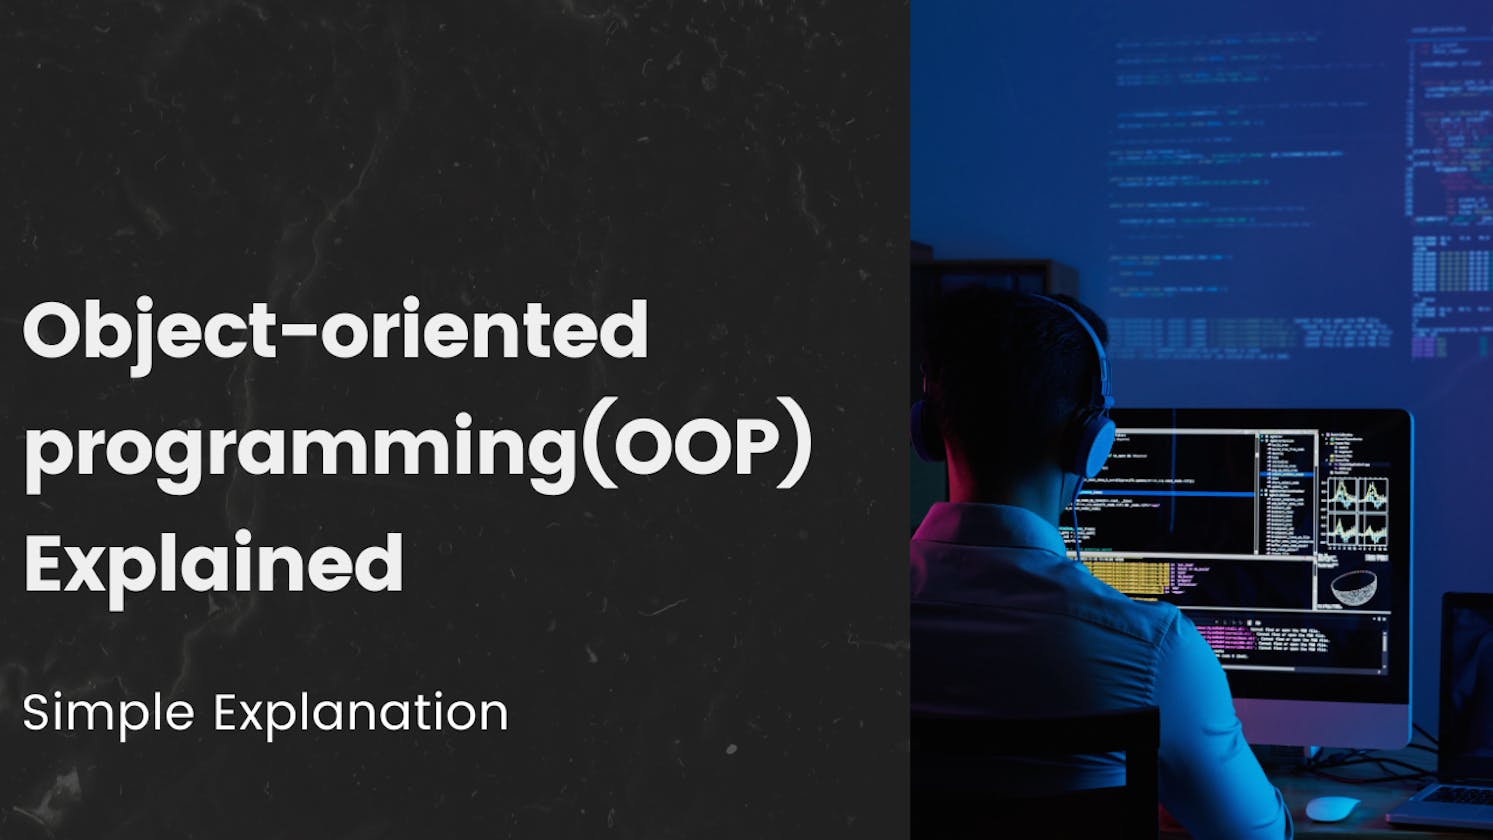 Object-oriented programming (OOP) Explained